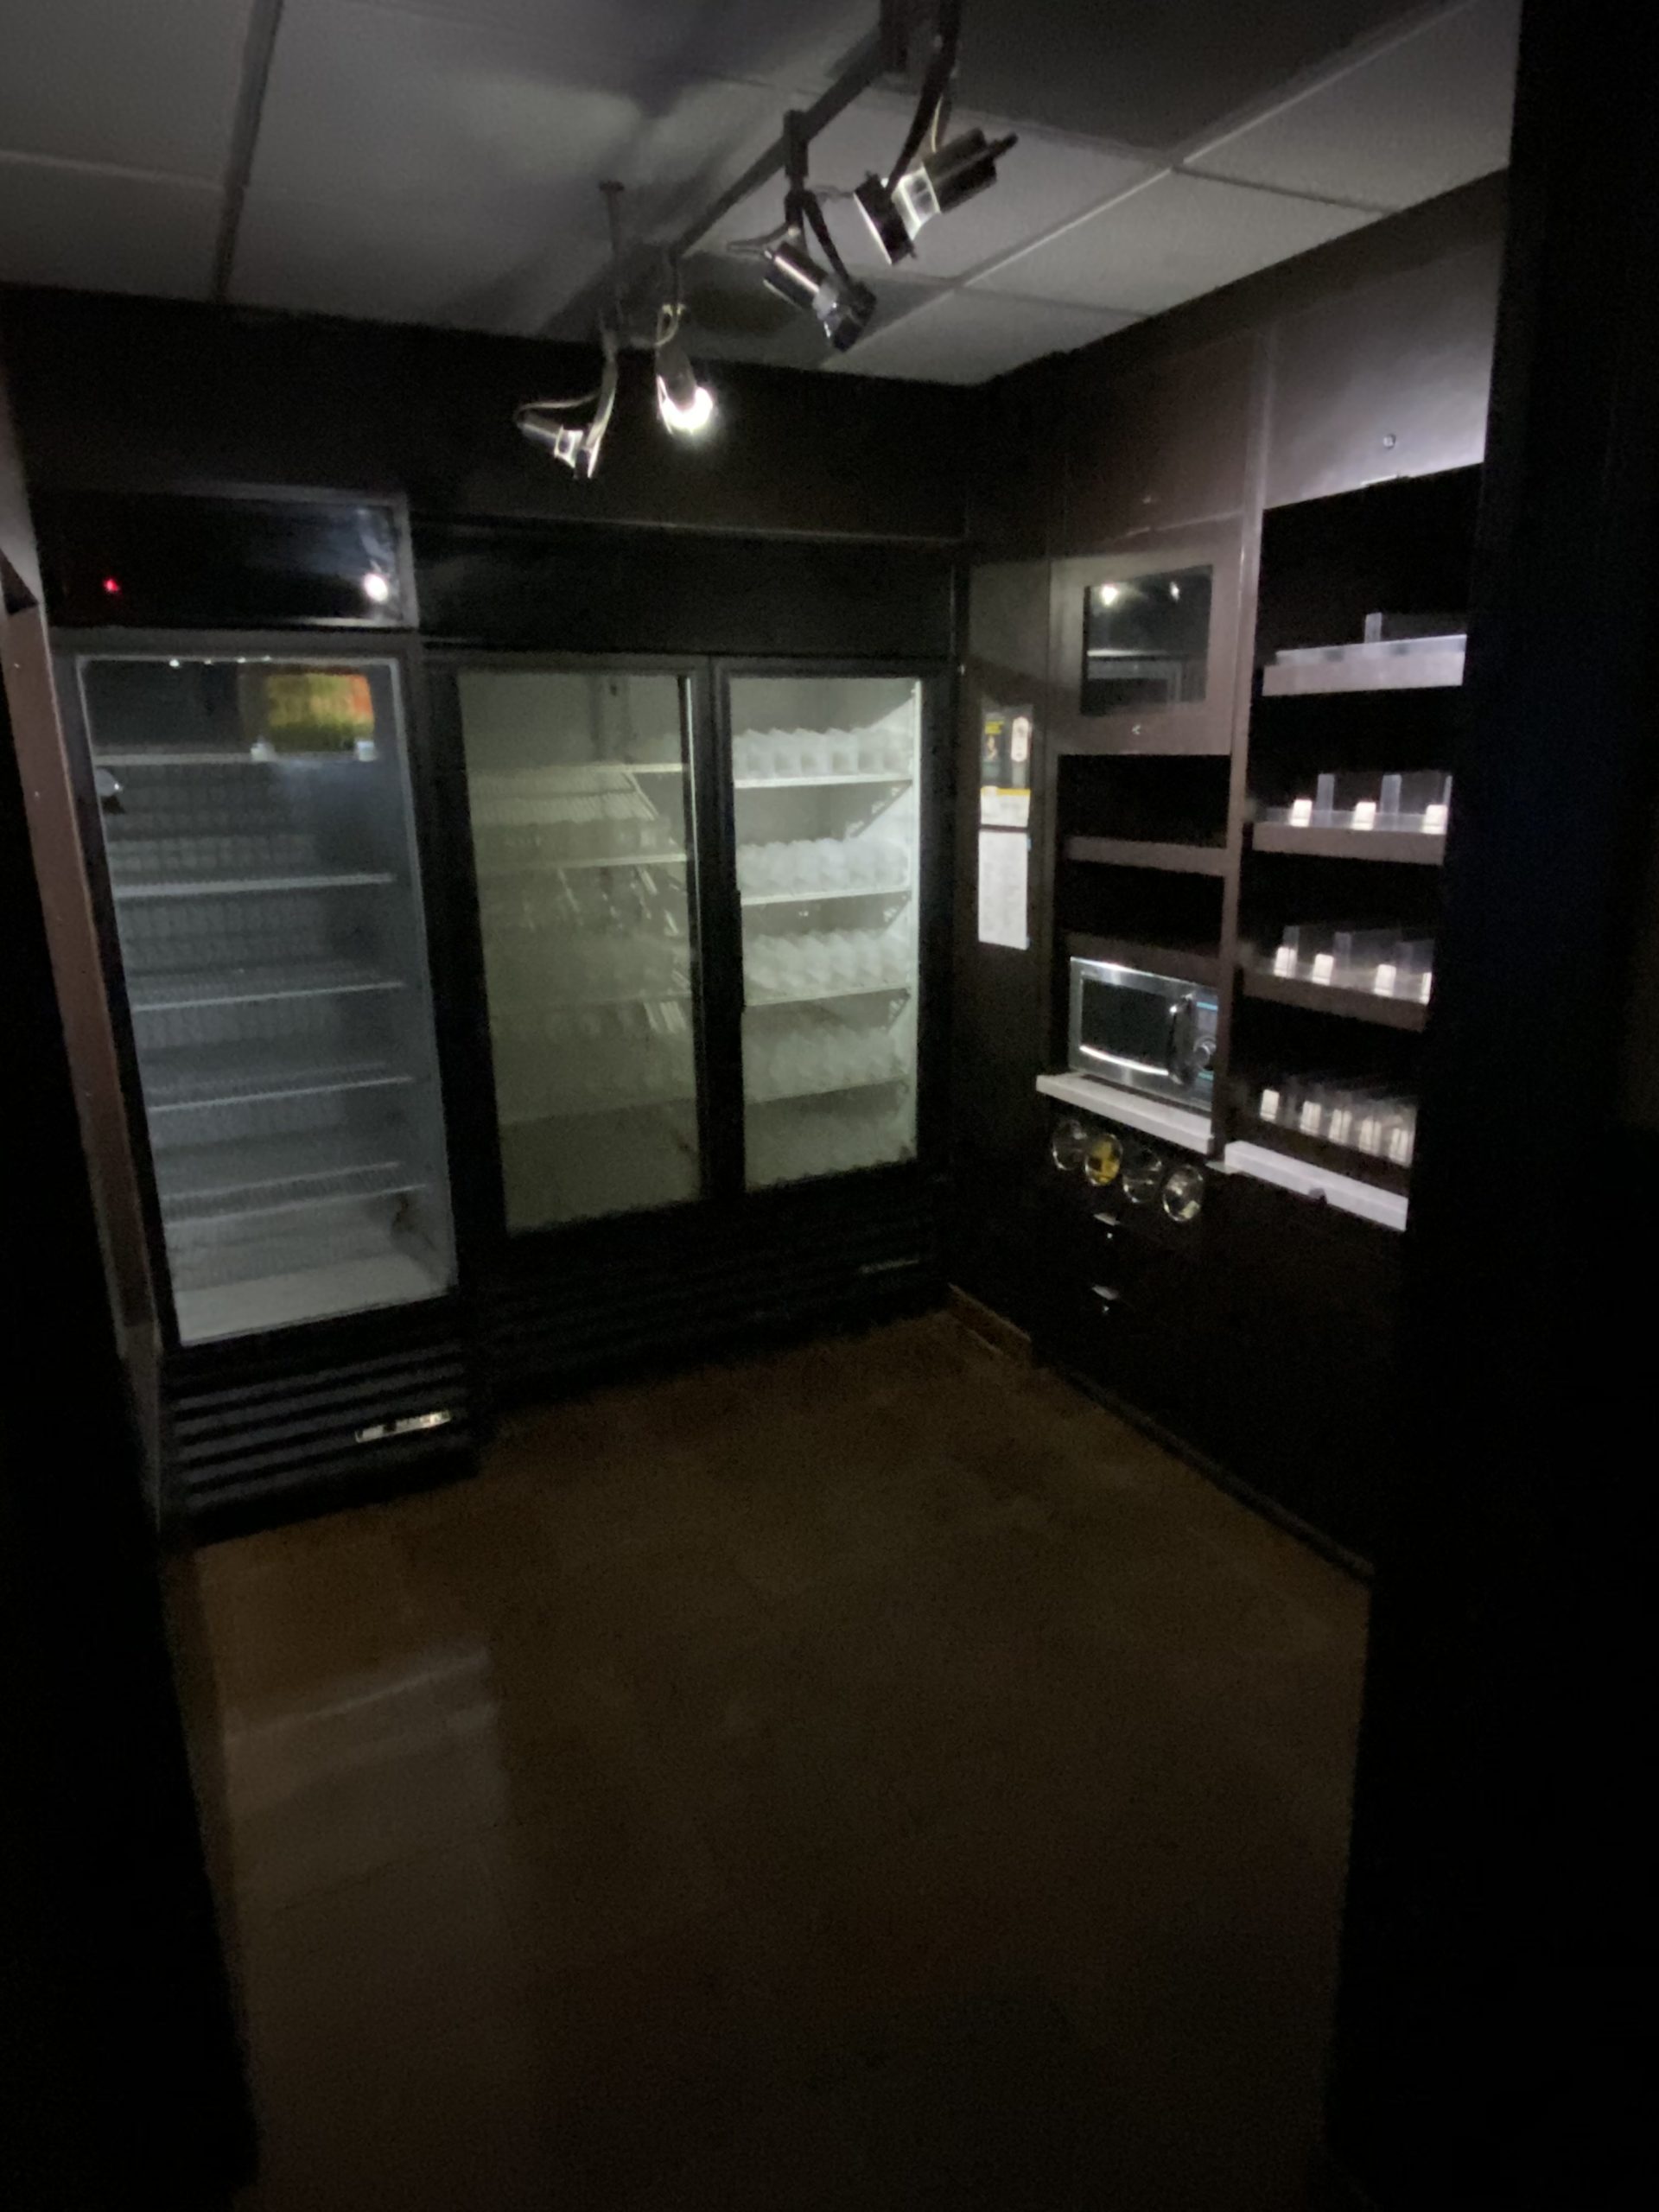 a refrigerator with shelves and lights